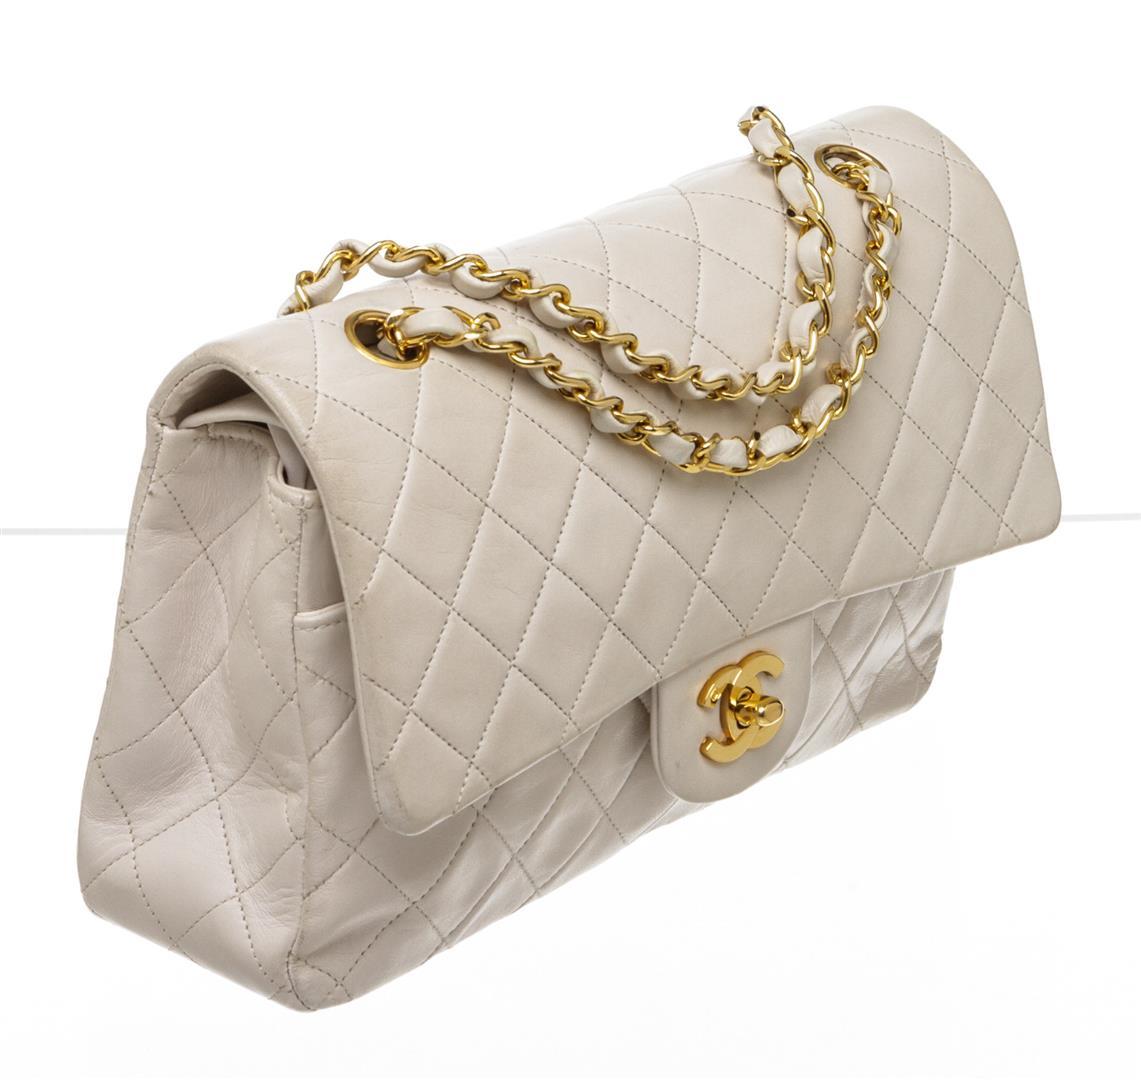 Chanel Chanel White Lambskin Leather Classic Medium Double Flap Bag